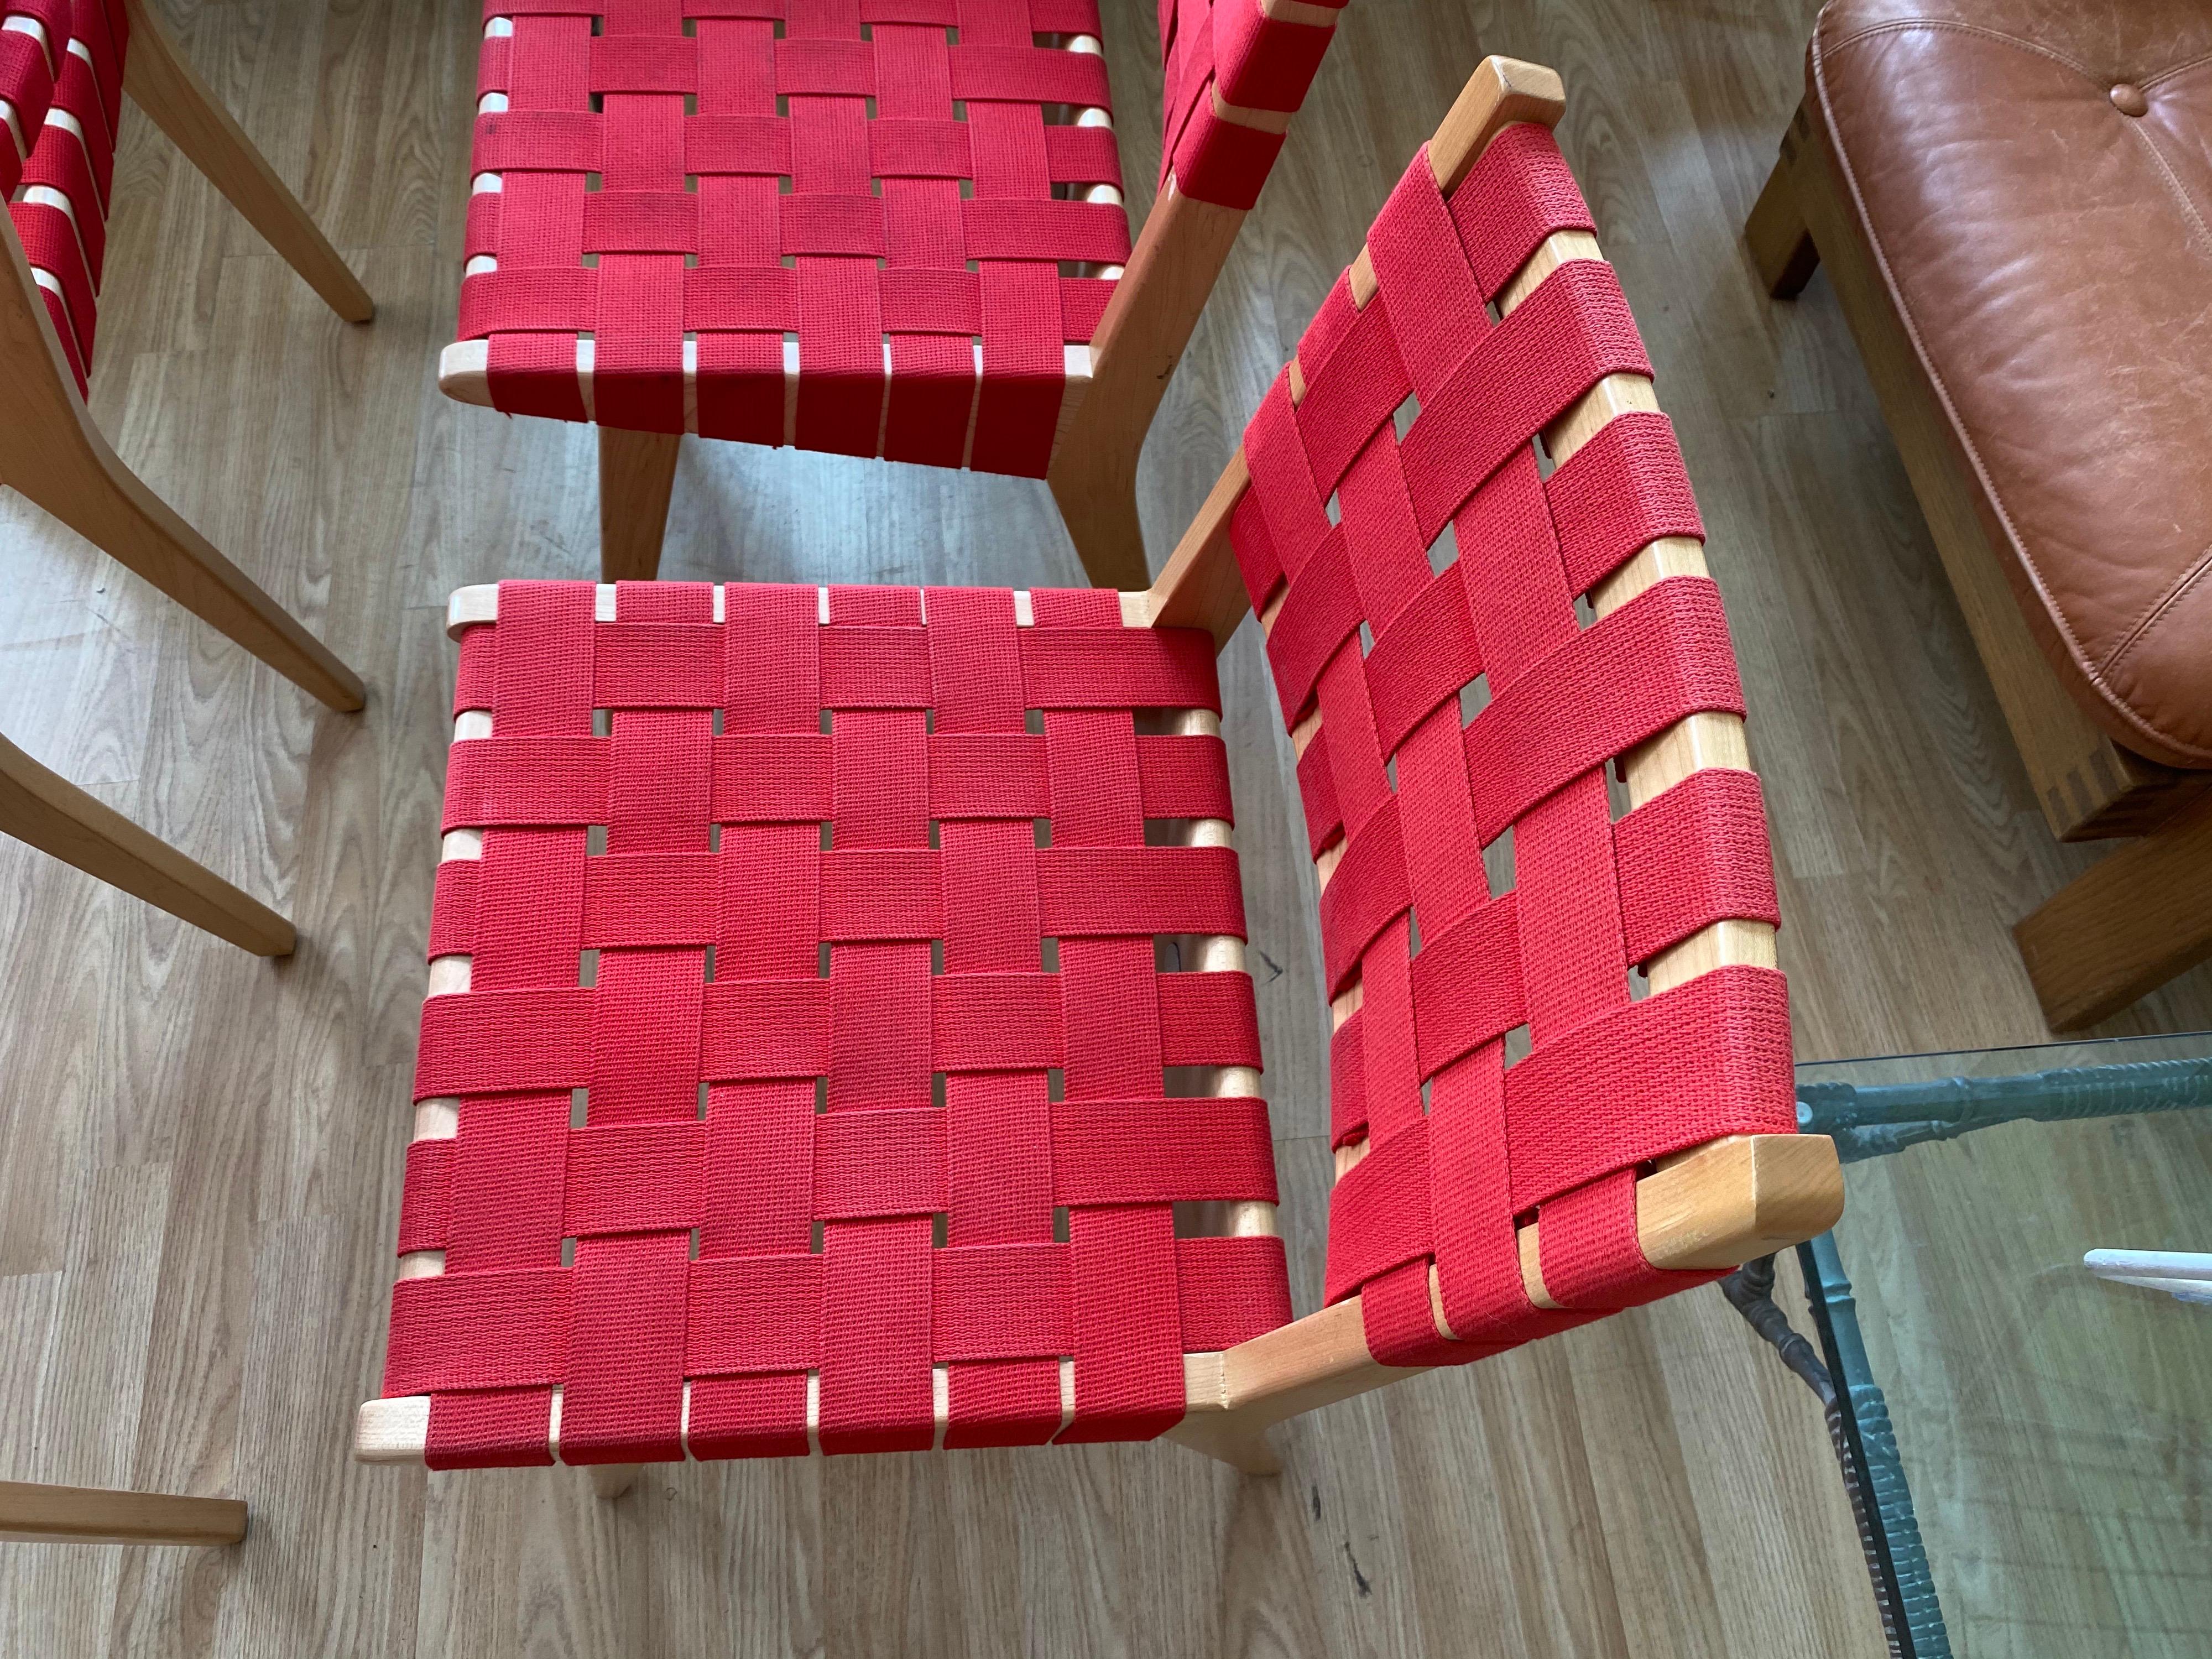 Working within wartime constraints, Risom designed his collection of chairs and tables using simple maple frames, essentially scraps of wood and rejected nylon straps from parachute production. This set of vibrant red 4 dining chairs are in good